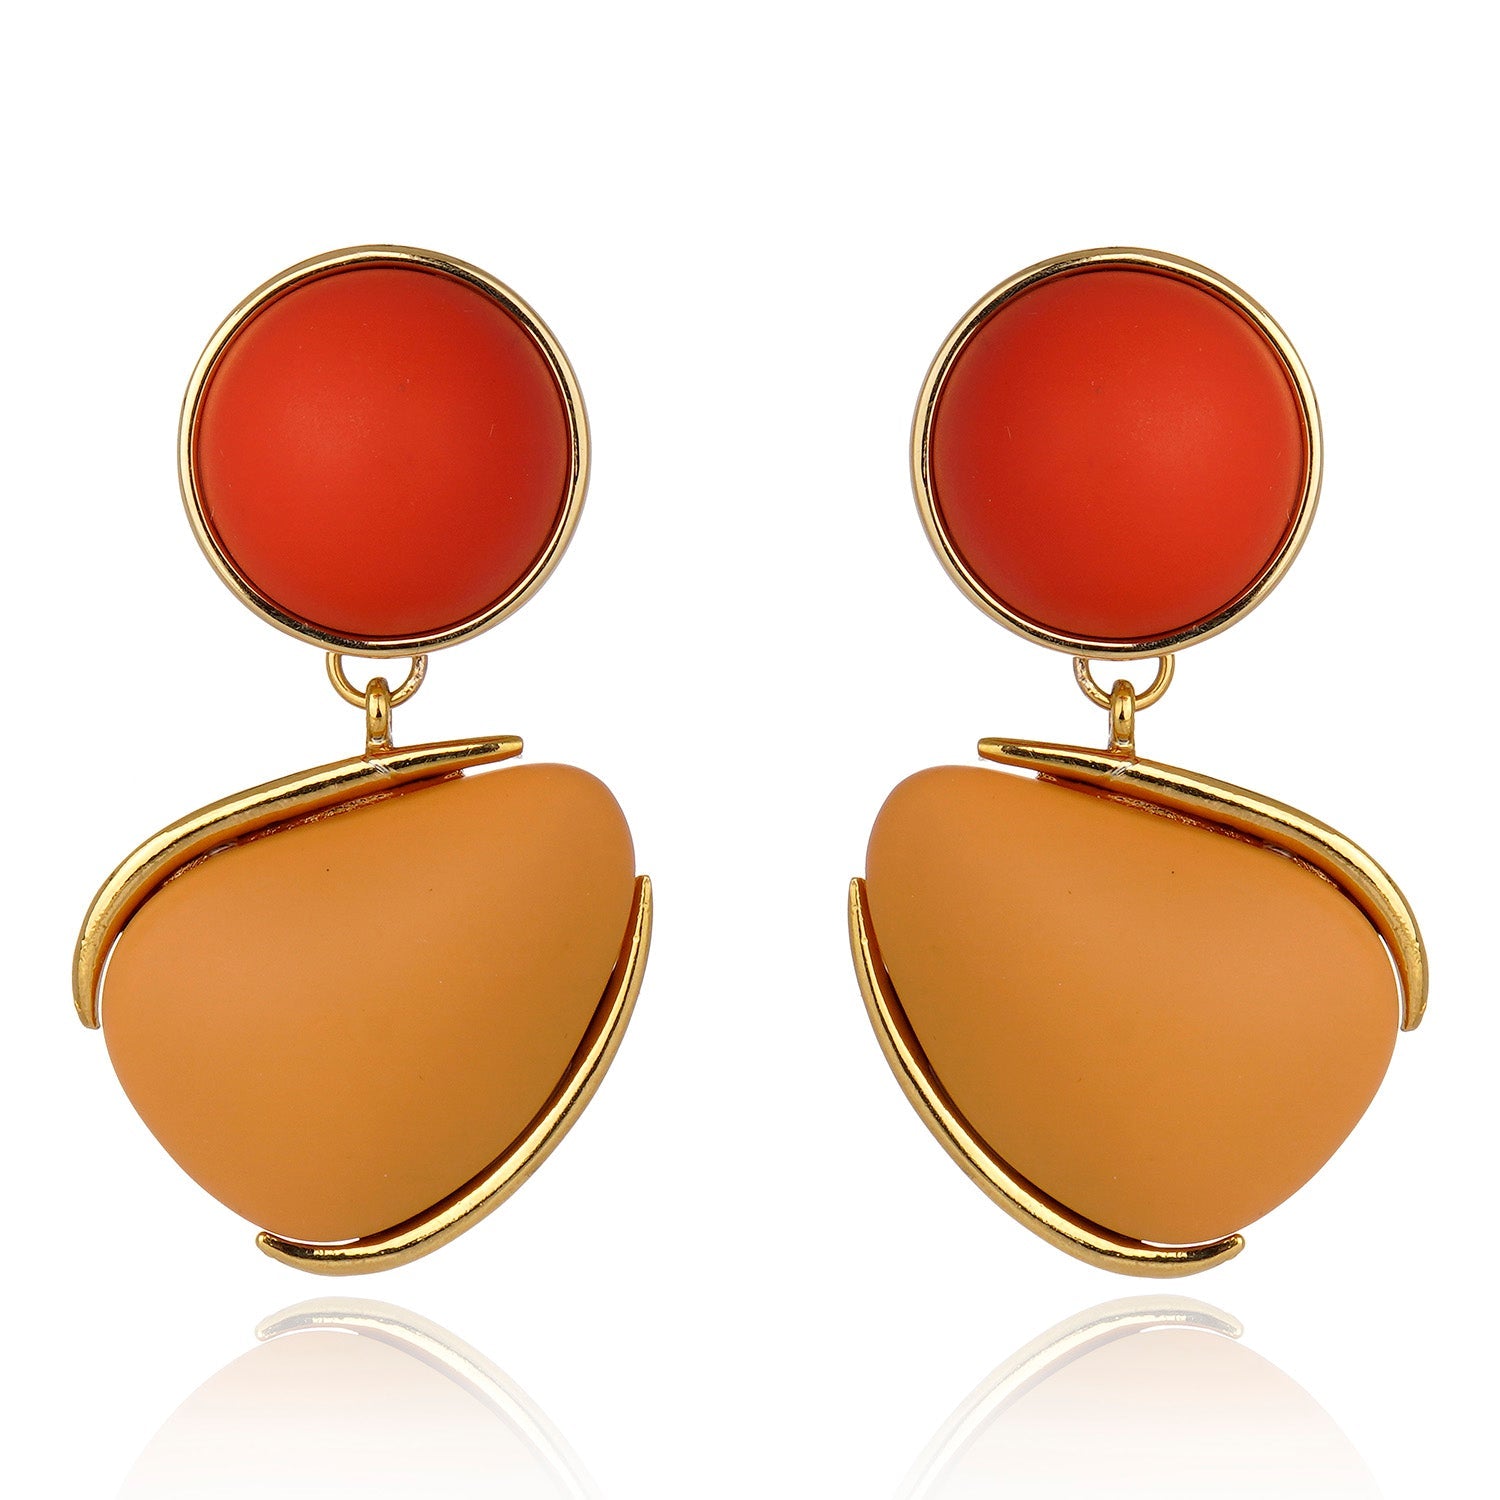 Dual Concept Resin Earring - Coral and Beige